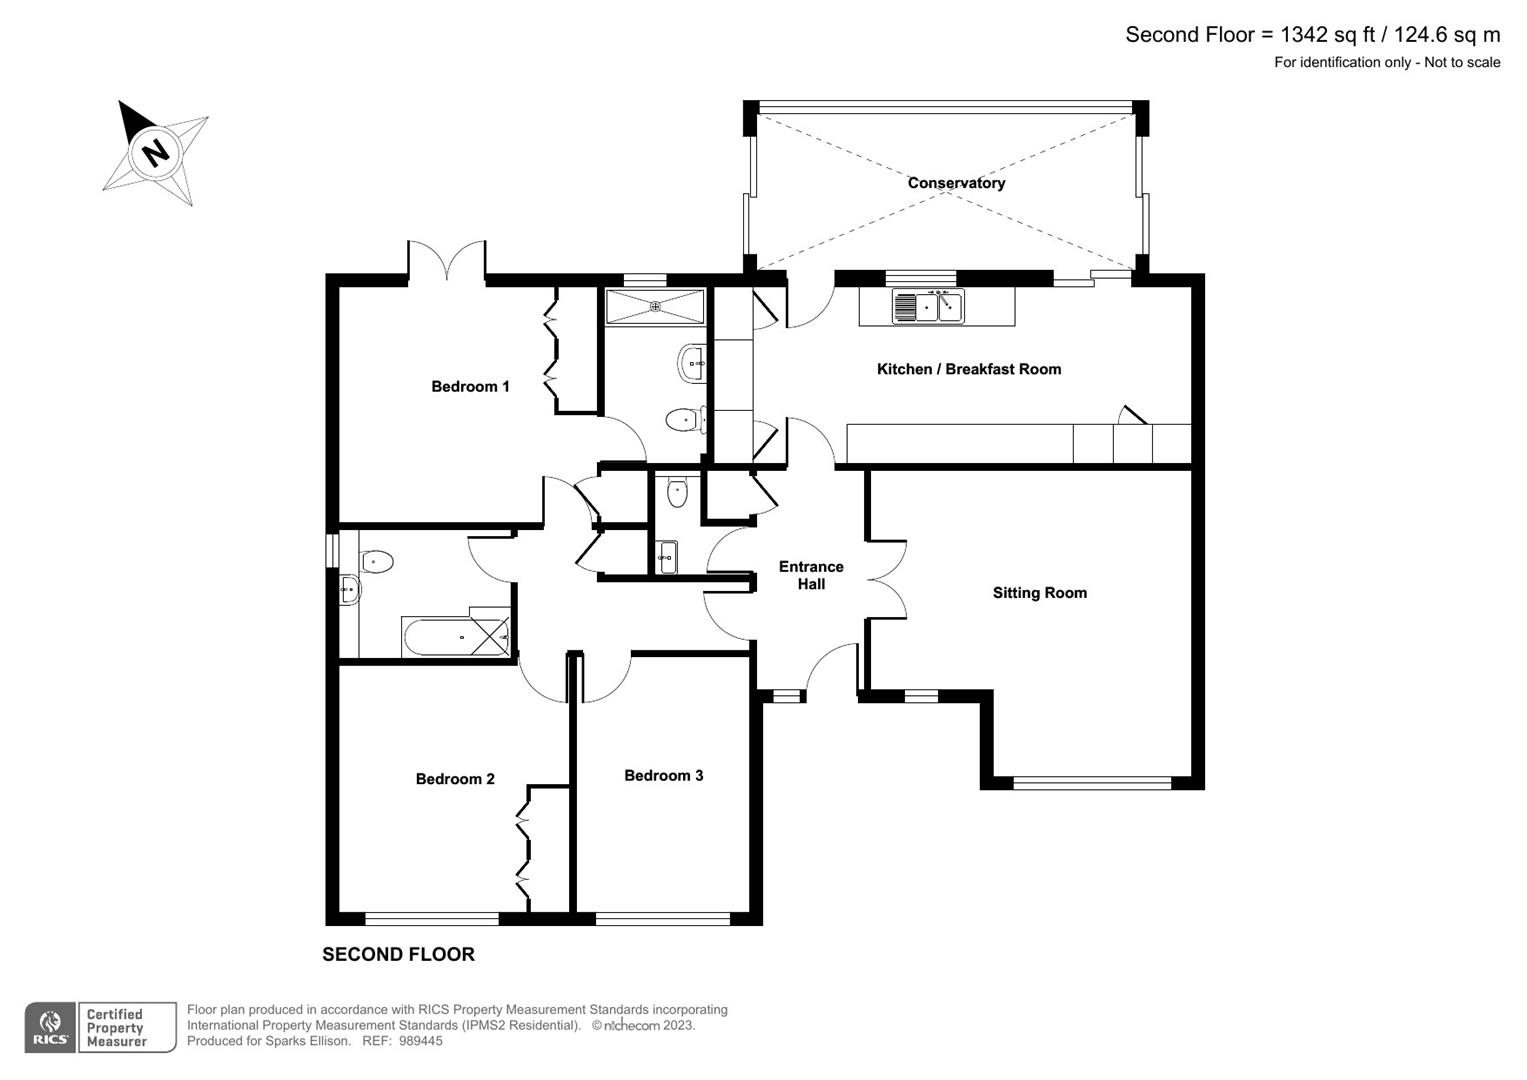 Taw Drive, Valley Park, Chandler’s Ford floorplan